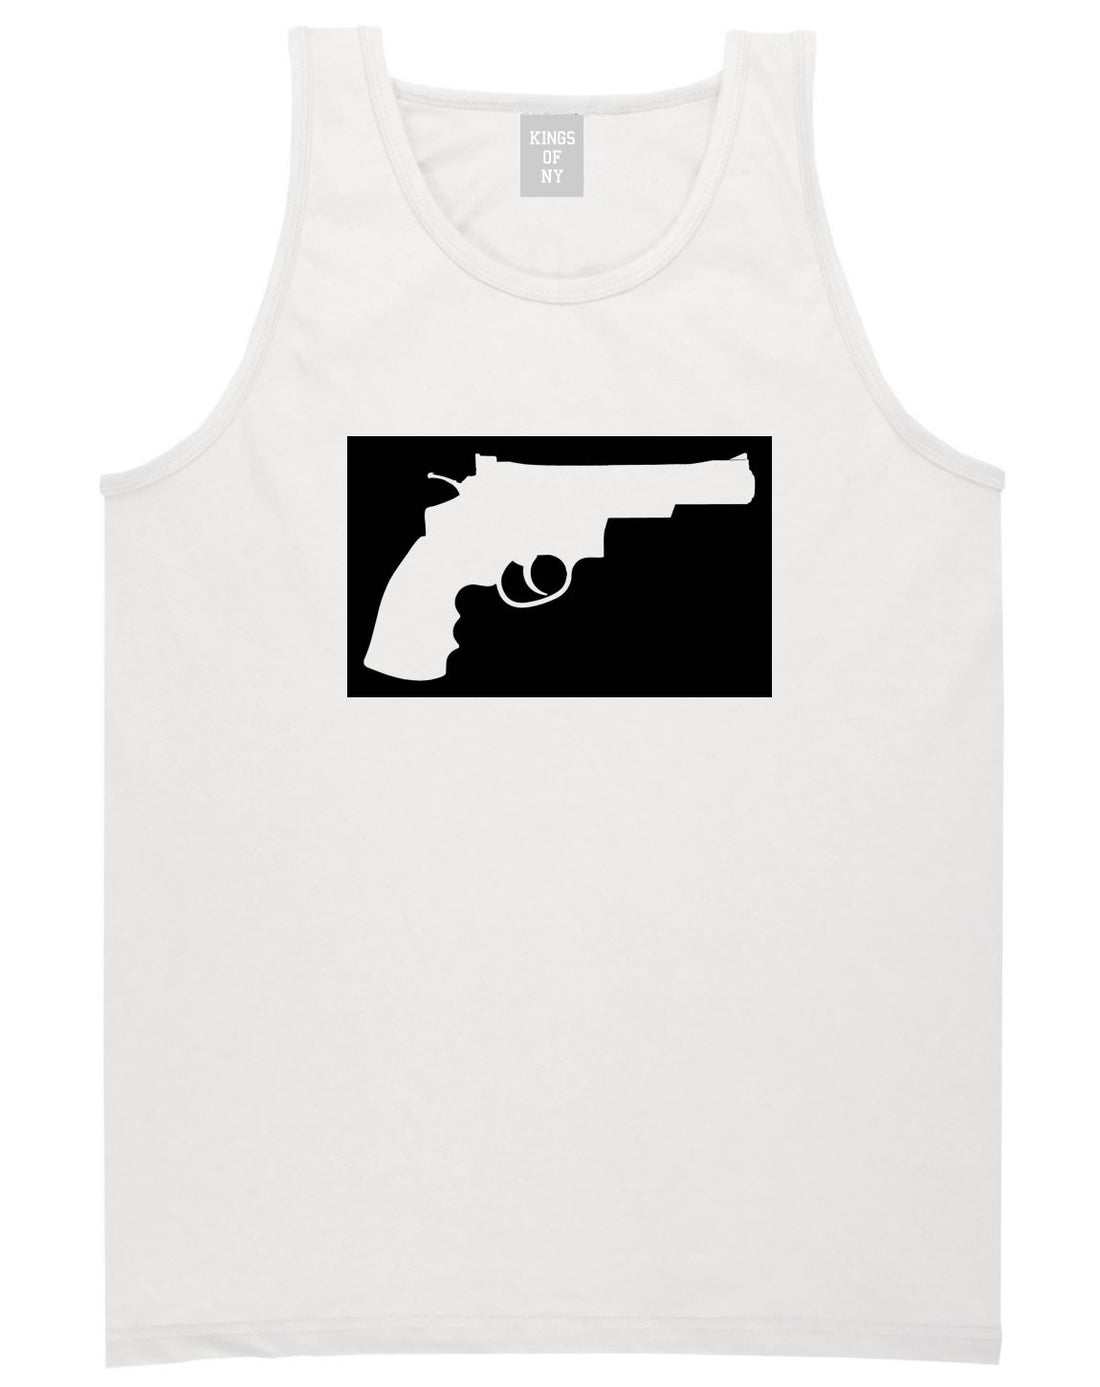 Gun Silhouette Revolver 45 Chrome Tank Top in White By Kings Of NY